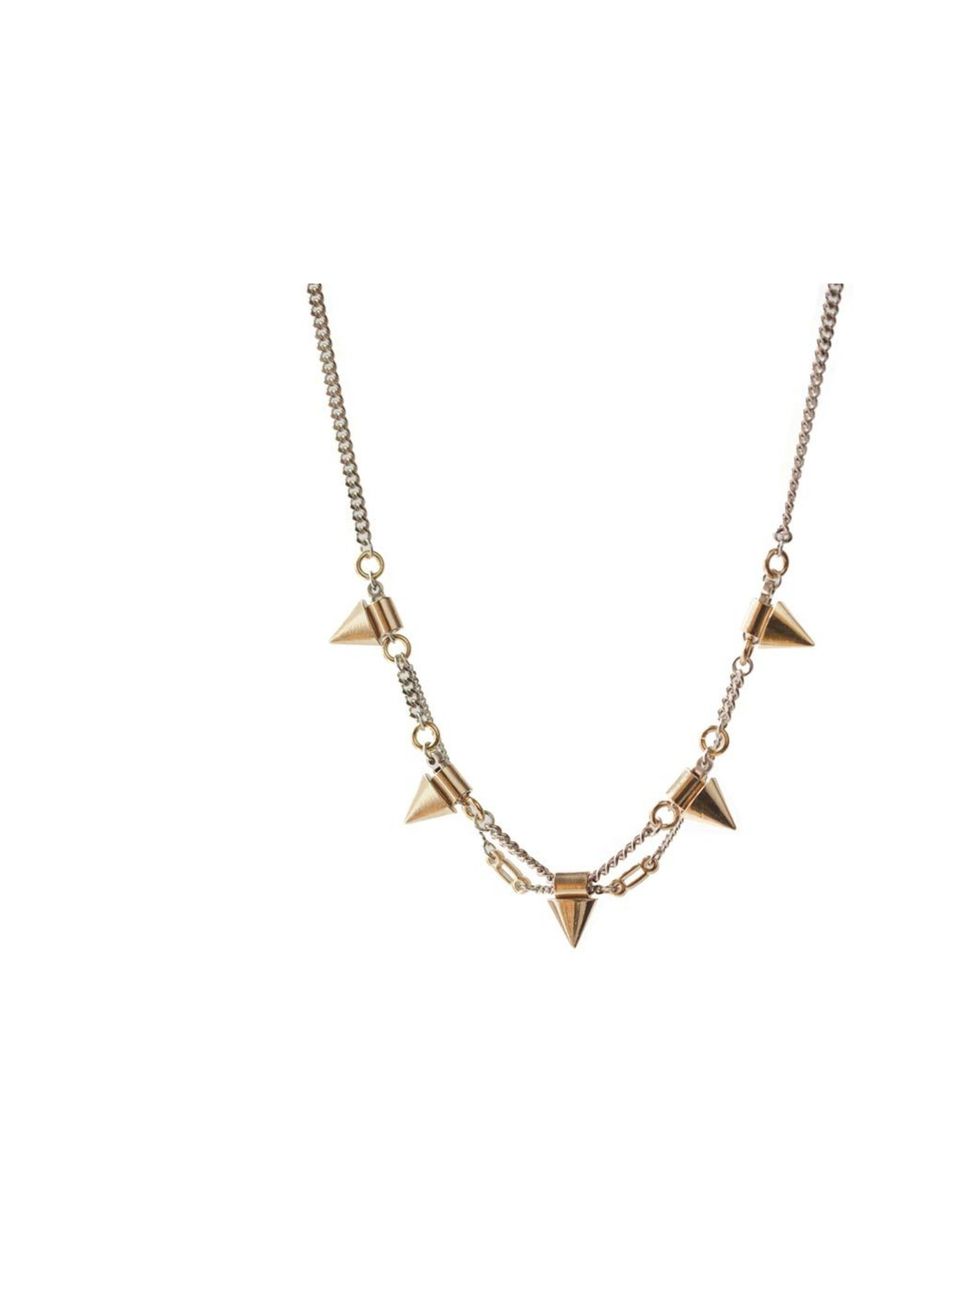 <p>Janine Barraclough necklace, £174, at Darkroom London, for stockists call 0207 831 7244</p>